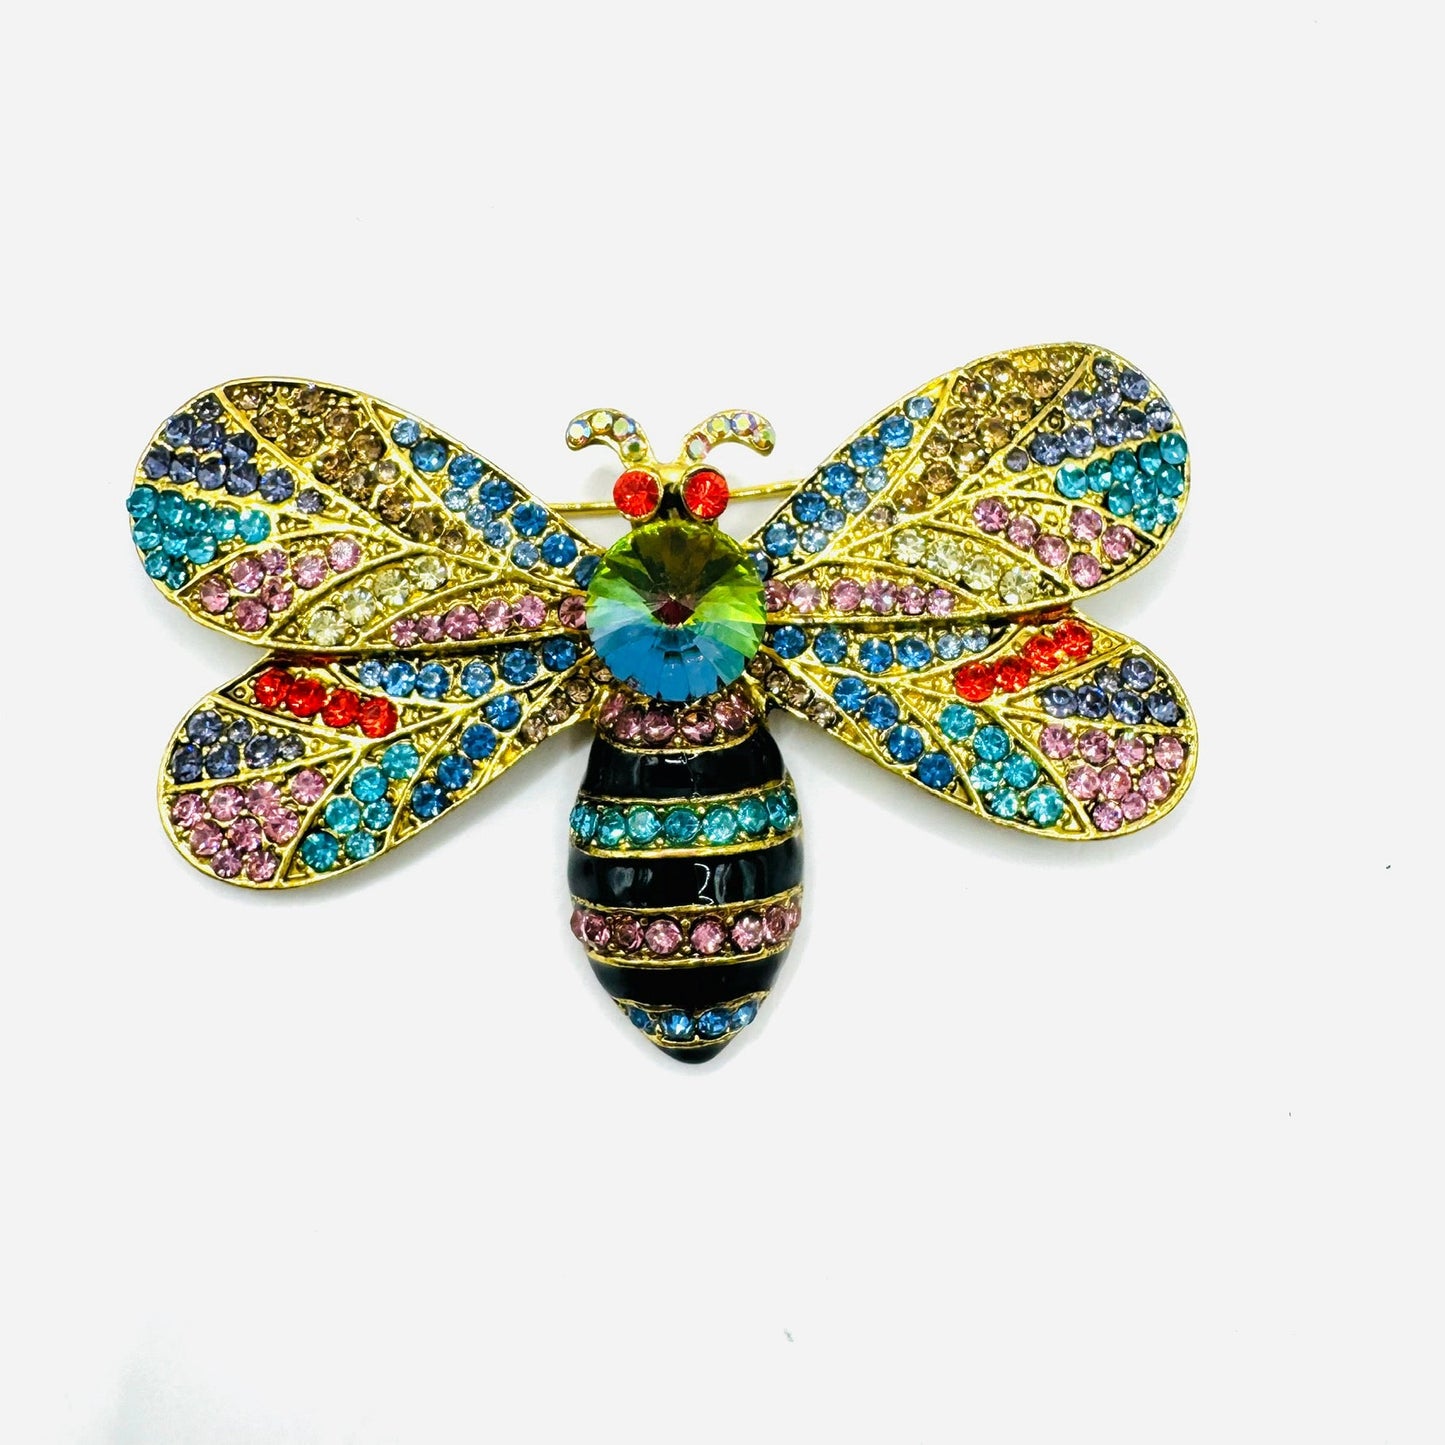 Butterfly & Bumble Bee Brooch Pins - House of FaSHUN by Shun Melson